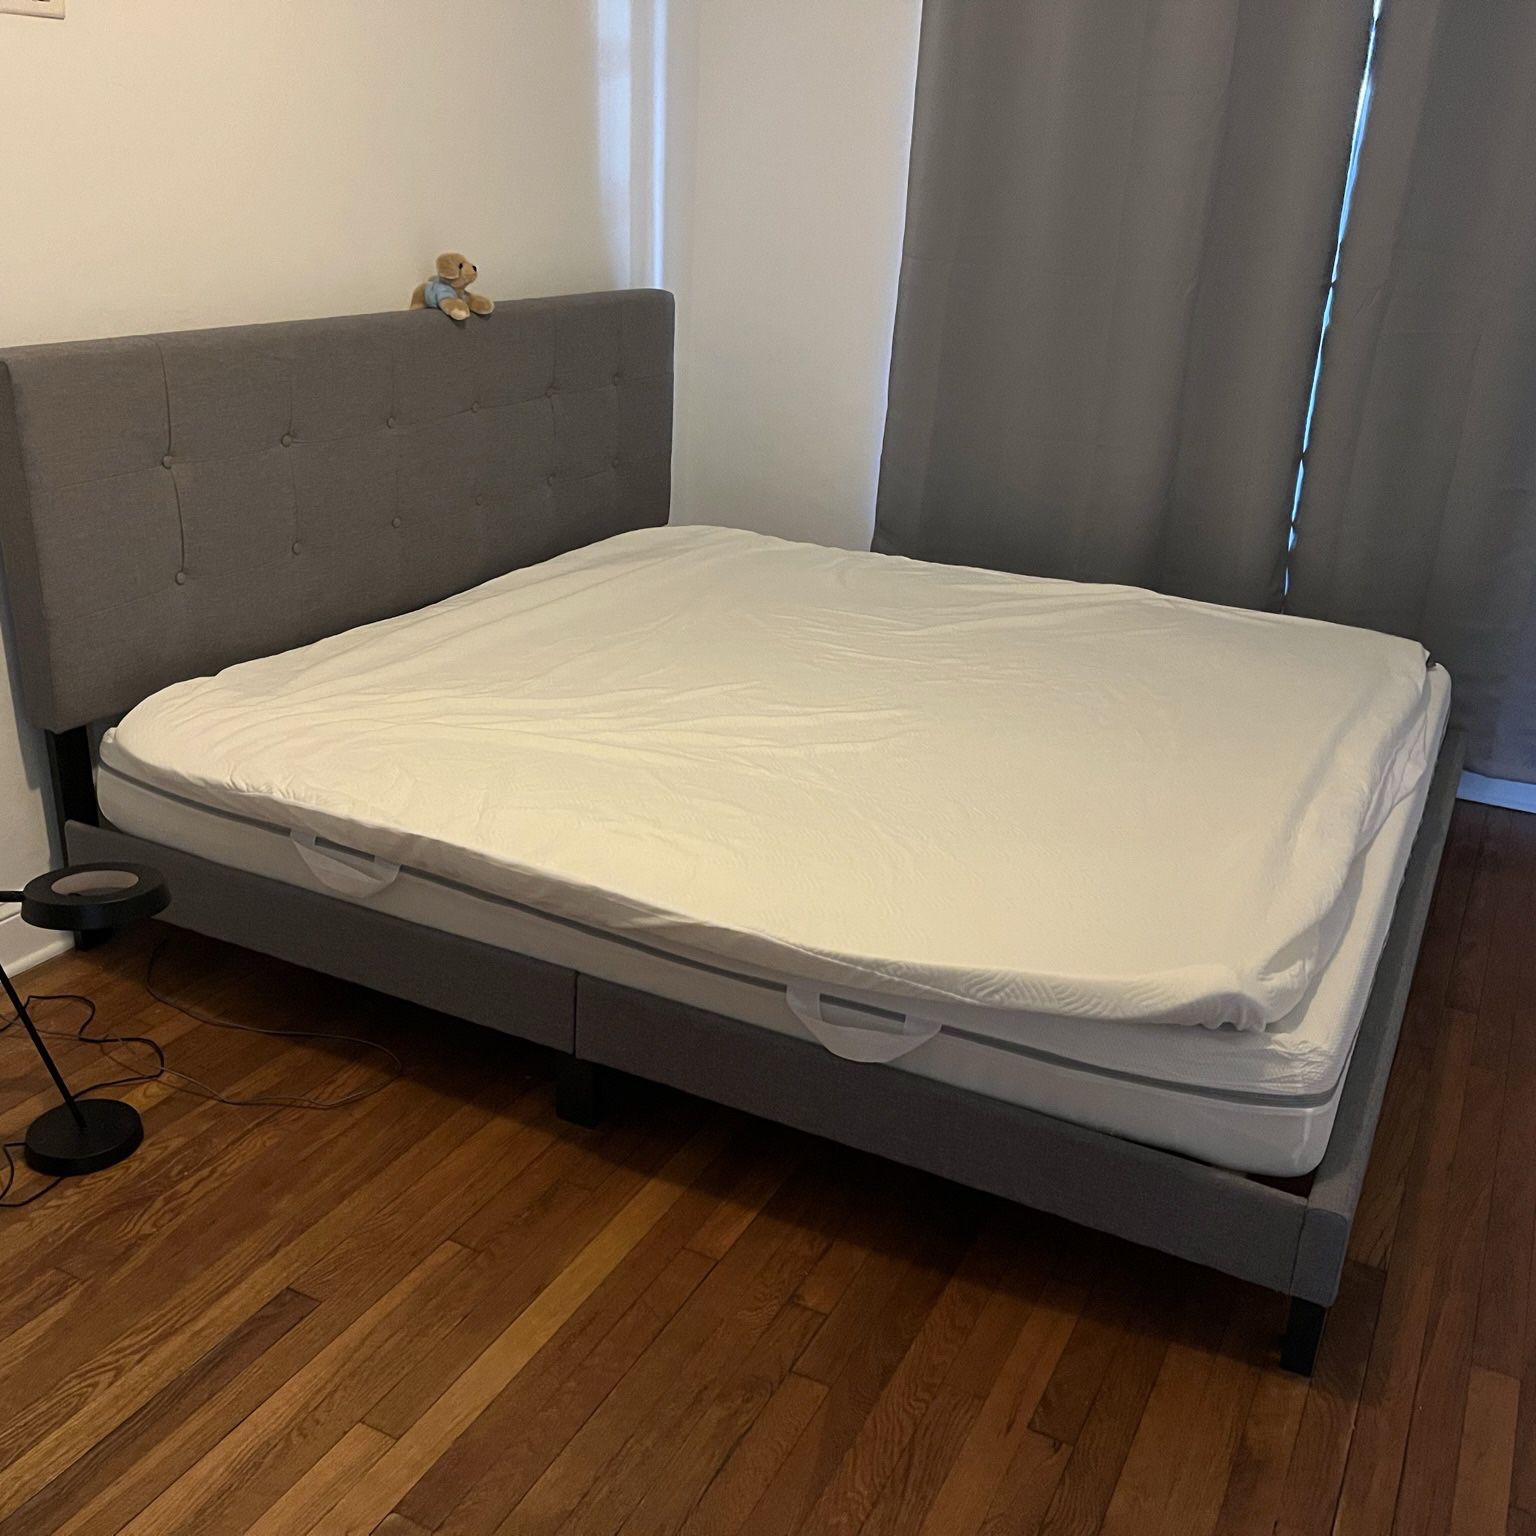 Bed Frame, Mattress, and Mattress Topper - King Size  - One Price For All Three